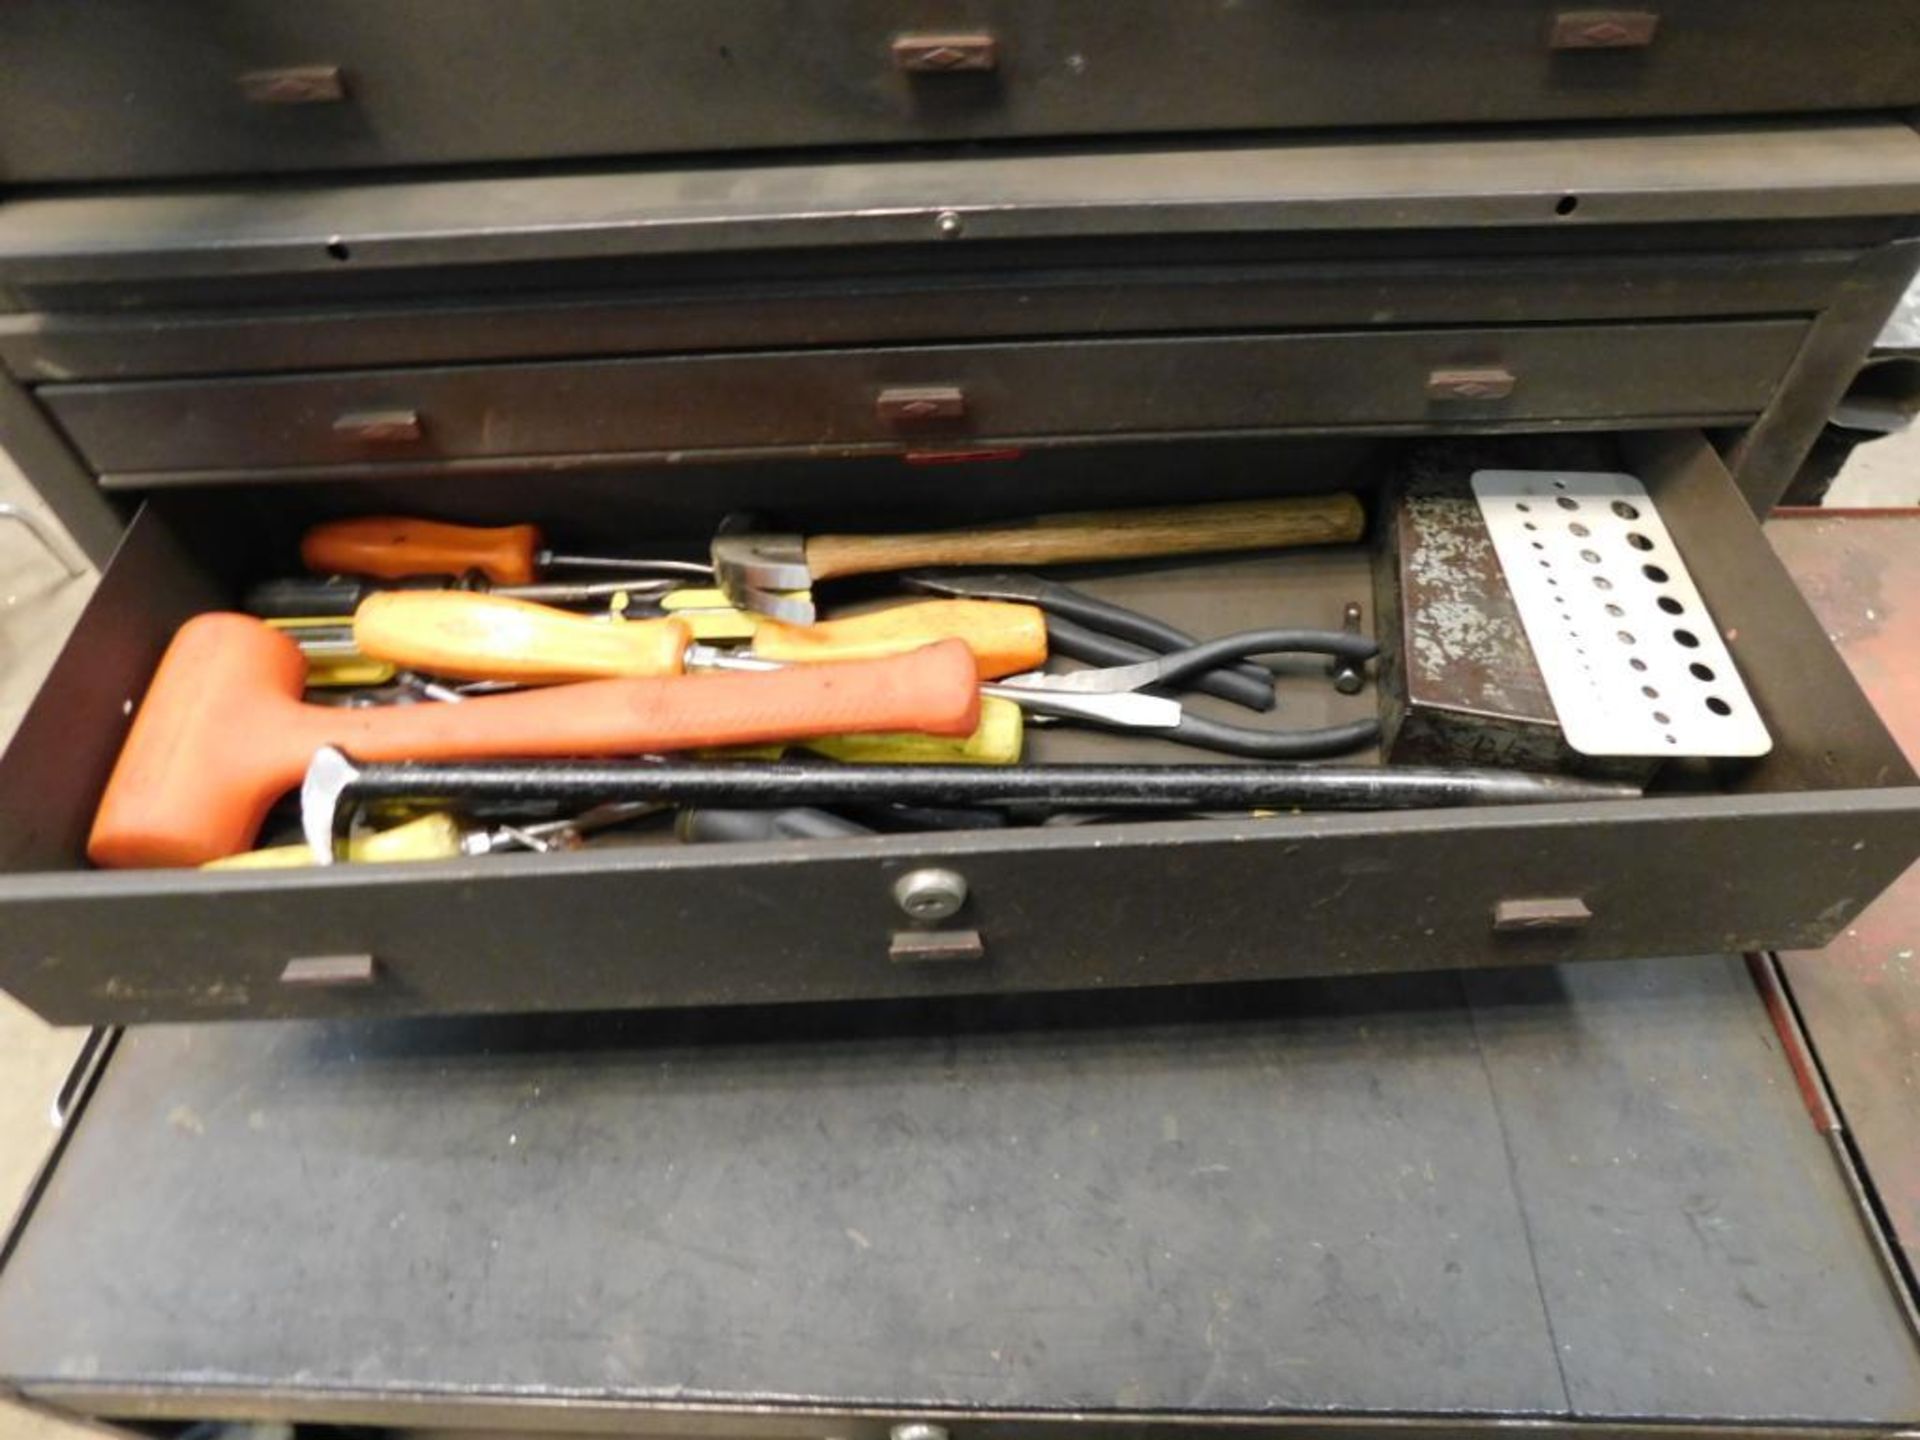 LOT: Portable 7-Drawer Tool Chest with Contents of Screw Drivers, Sockets, Wrenches, Hammers, - Image 5 of 5